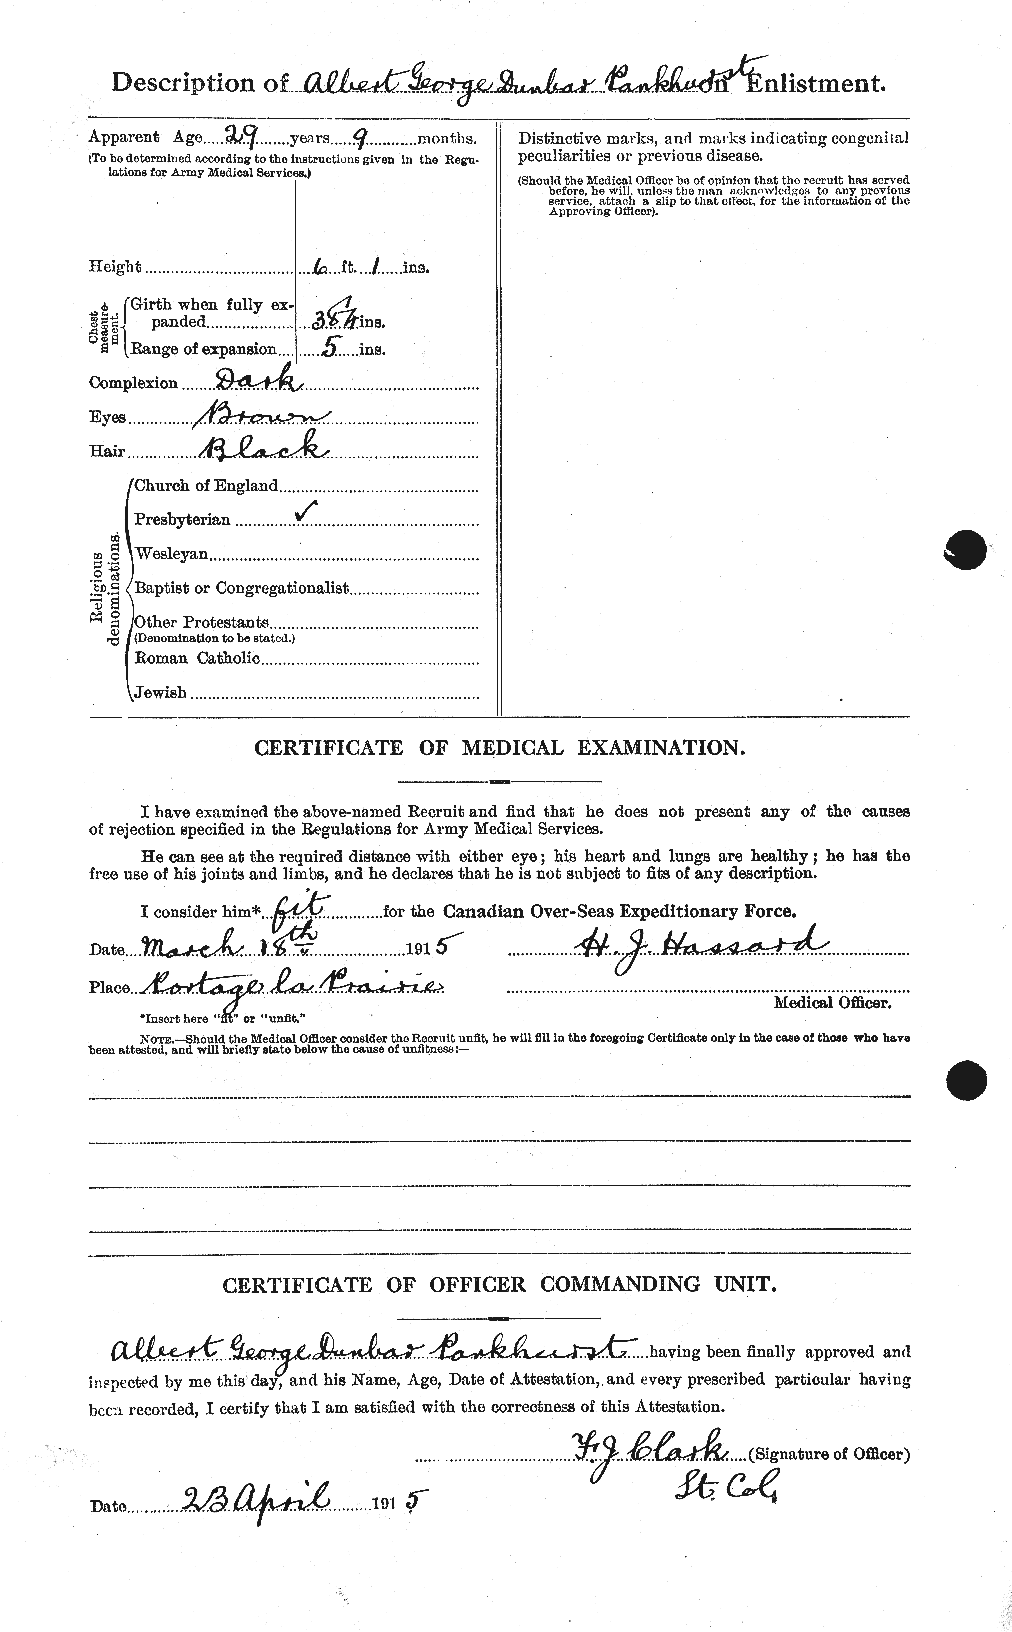 Personnel Records of the First World War - CEF 563370b